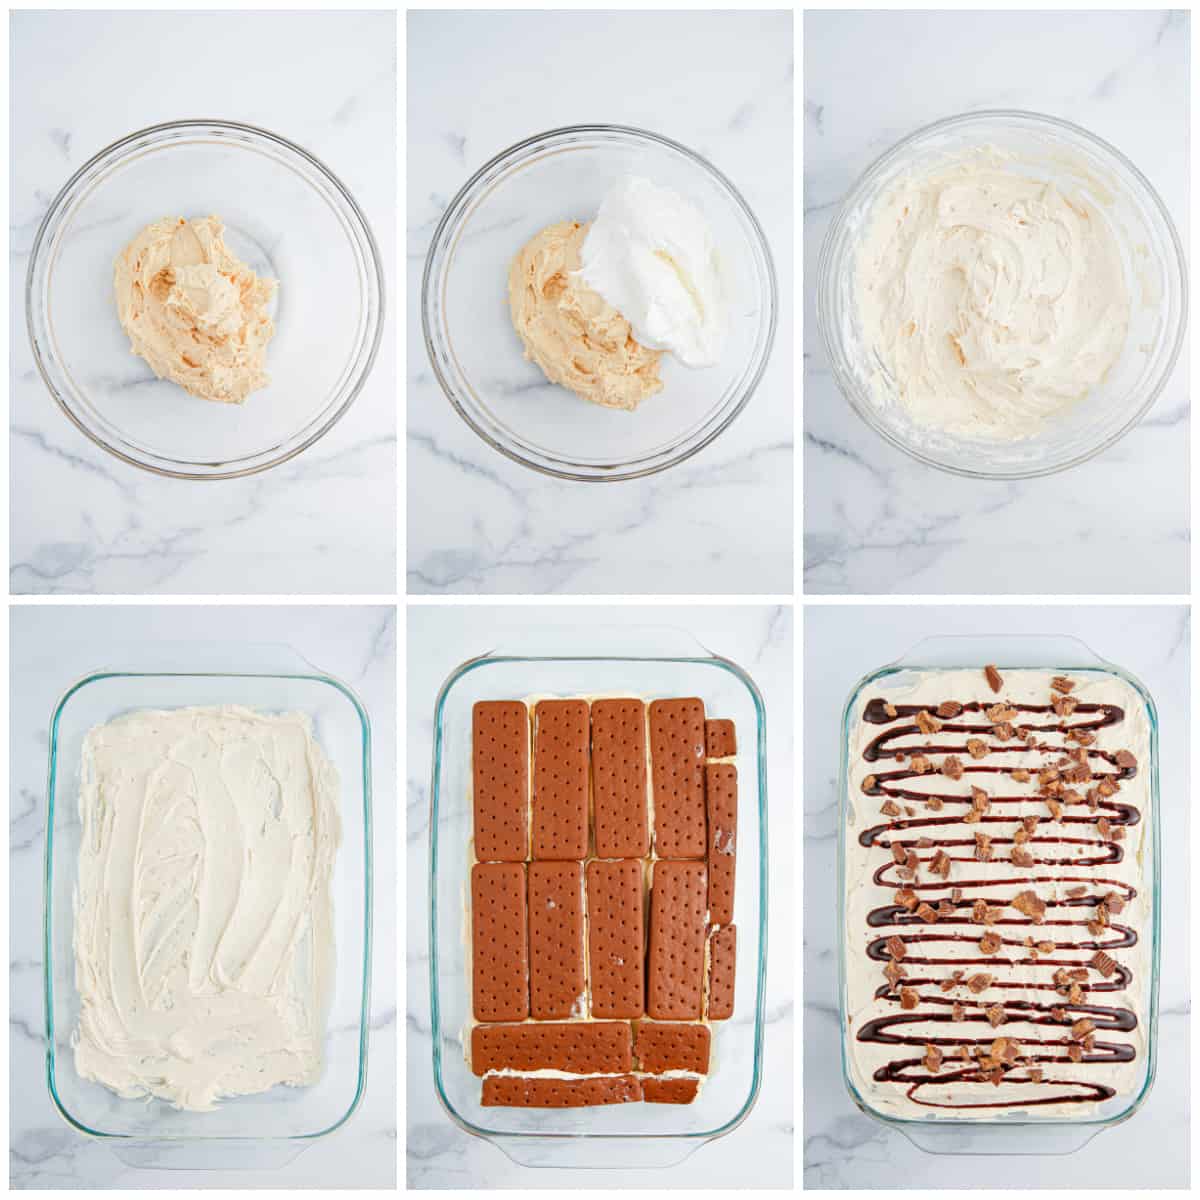 Step by step photos on how to make a Reese's Ice Cream Sandwich Cake.